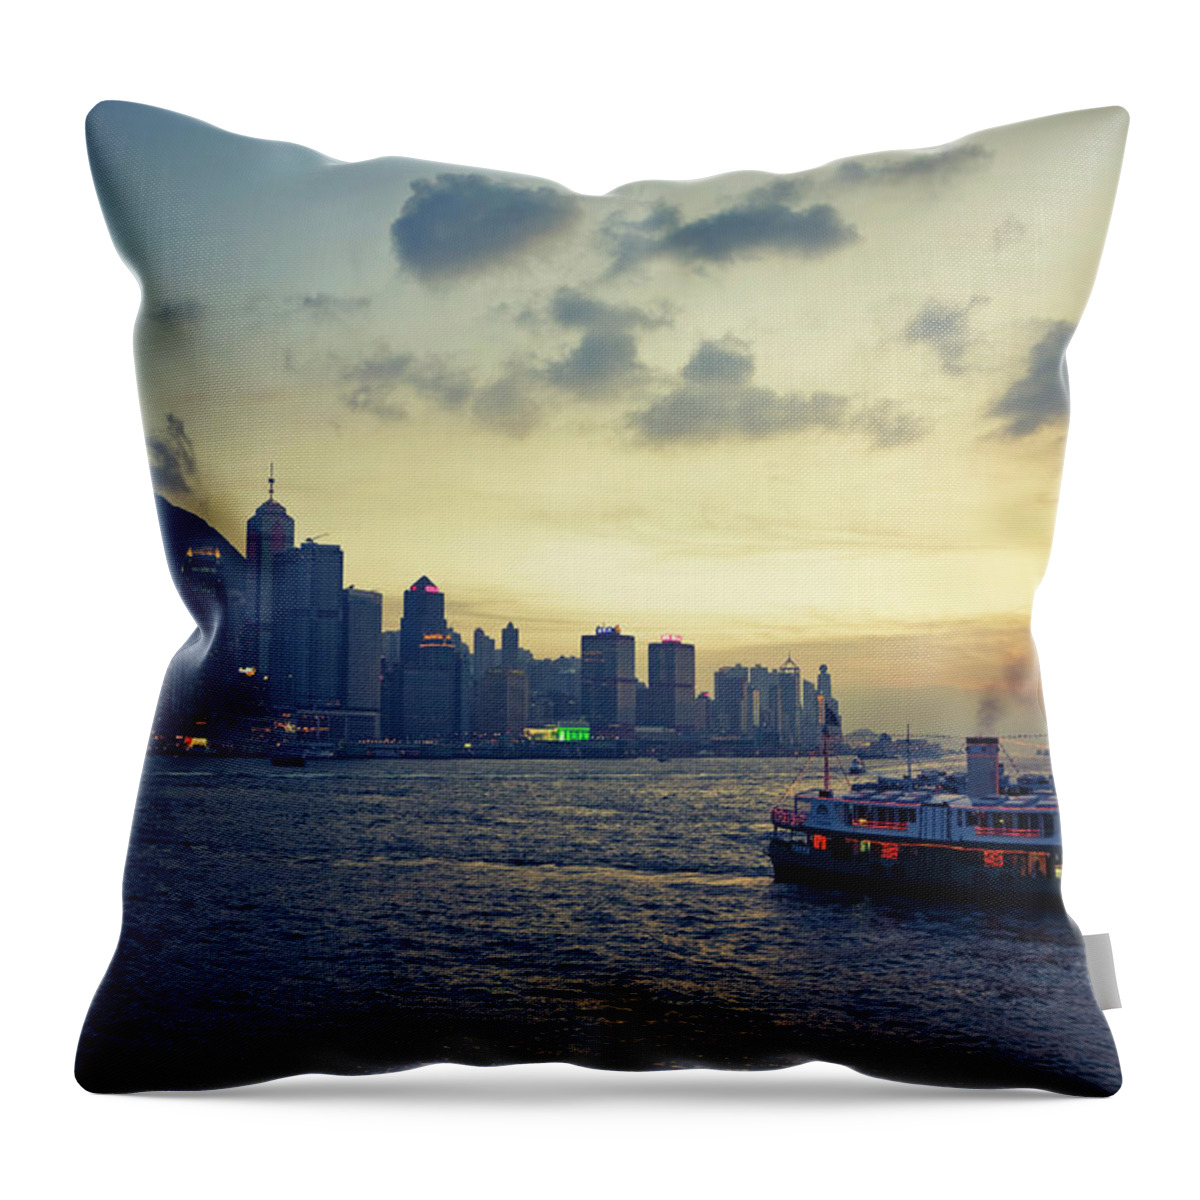 Built Structure Throw Pillow featuring the photograph Ferry And Hong Kong Island Waterfront by Merten Snijders